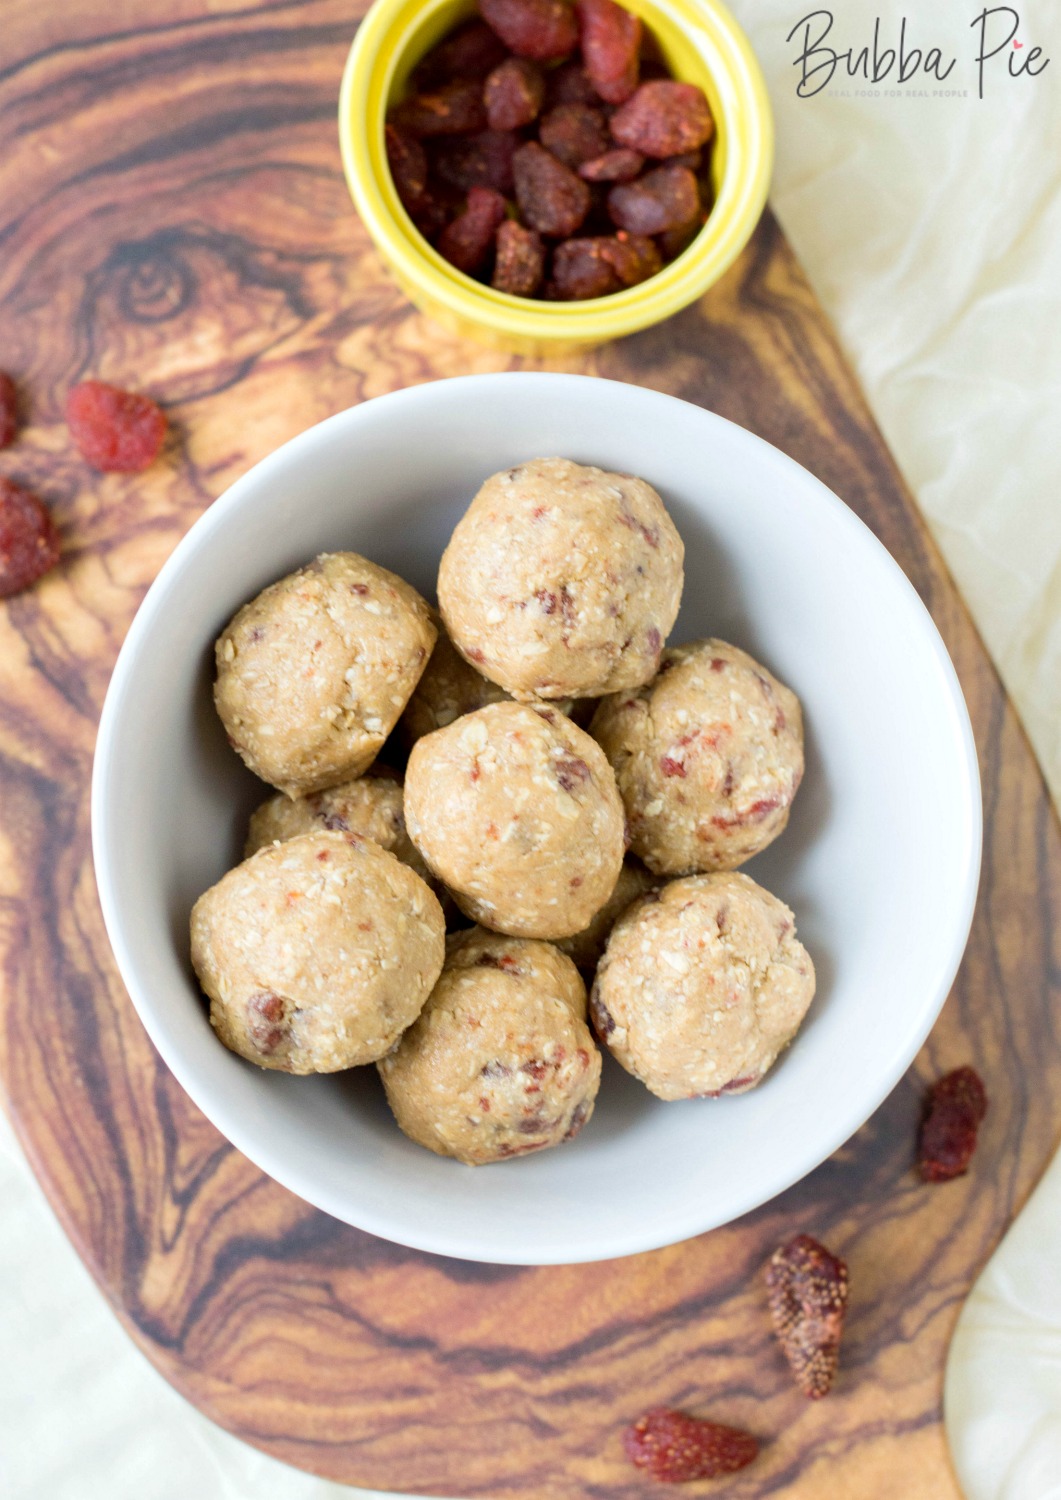 Strawberry Energy Balls Recipe has almond flour, rolled oats, honey and peanut butter